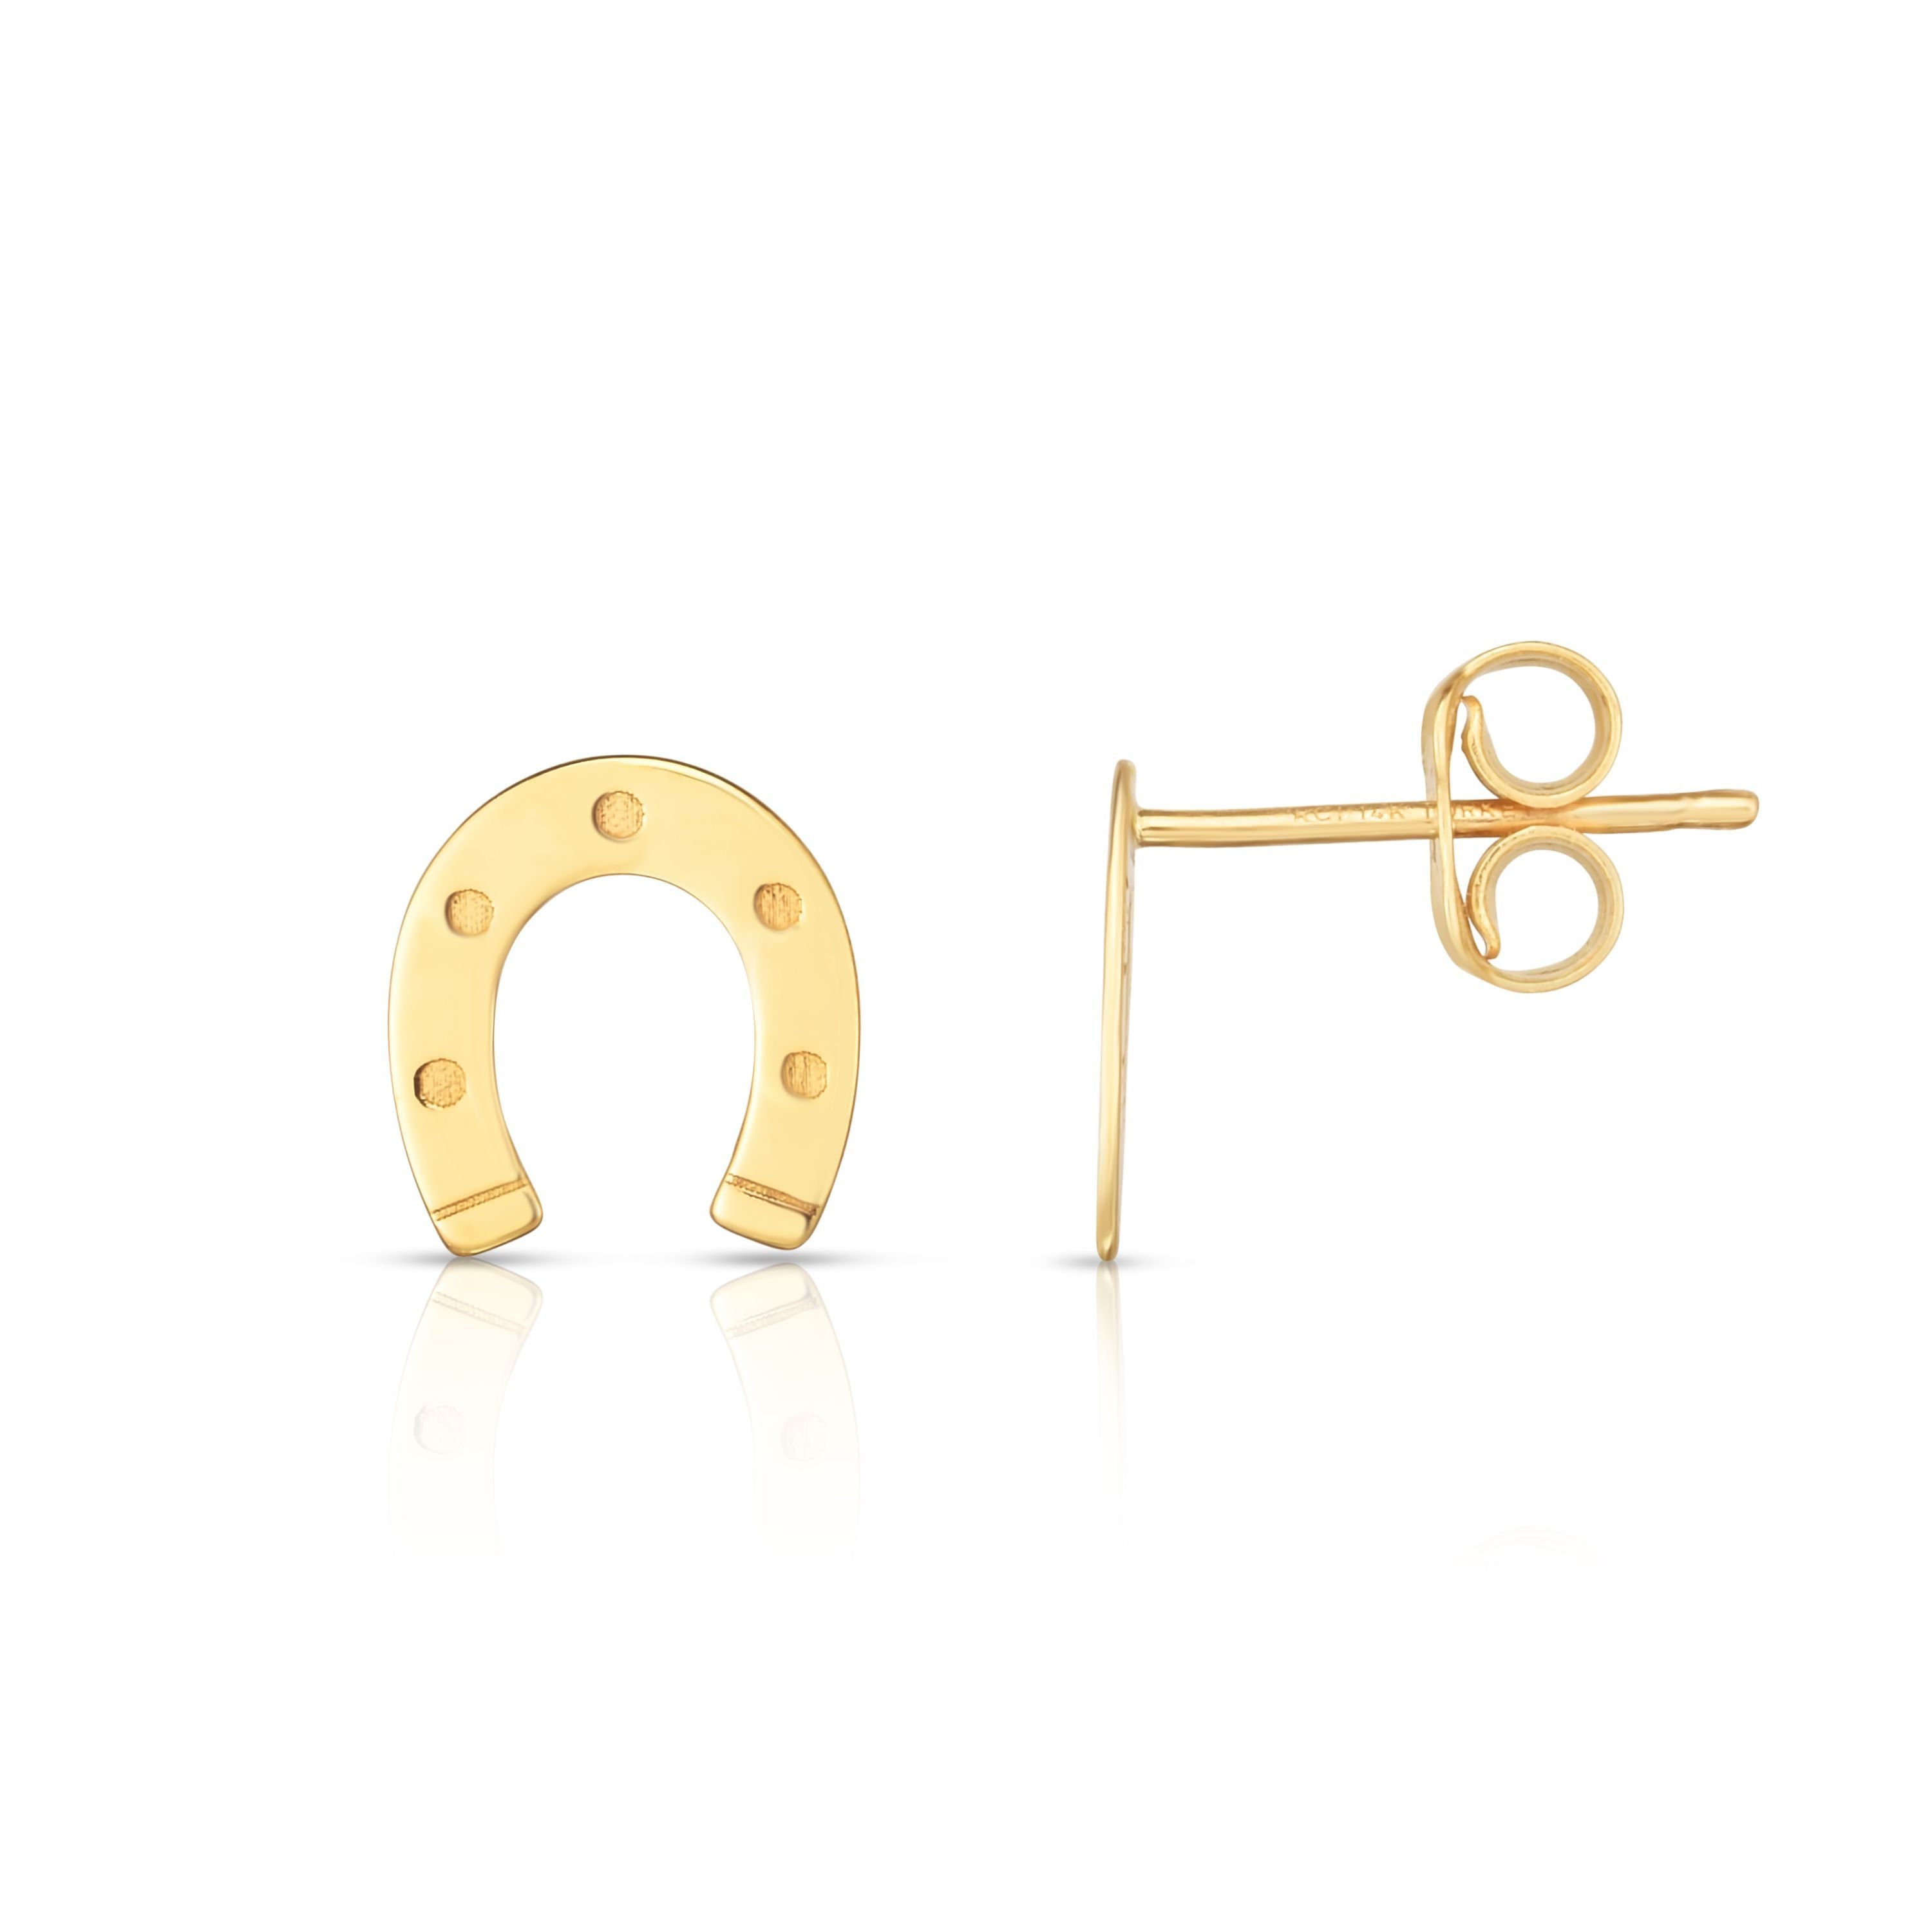 The Definitive Guide to Earring Clasp Types & Backs